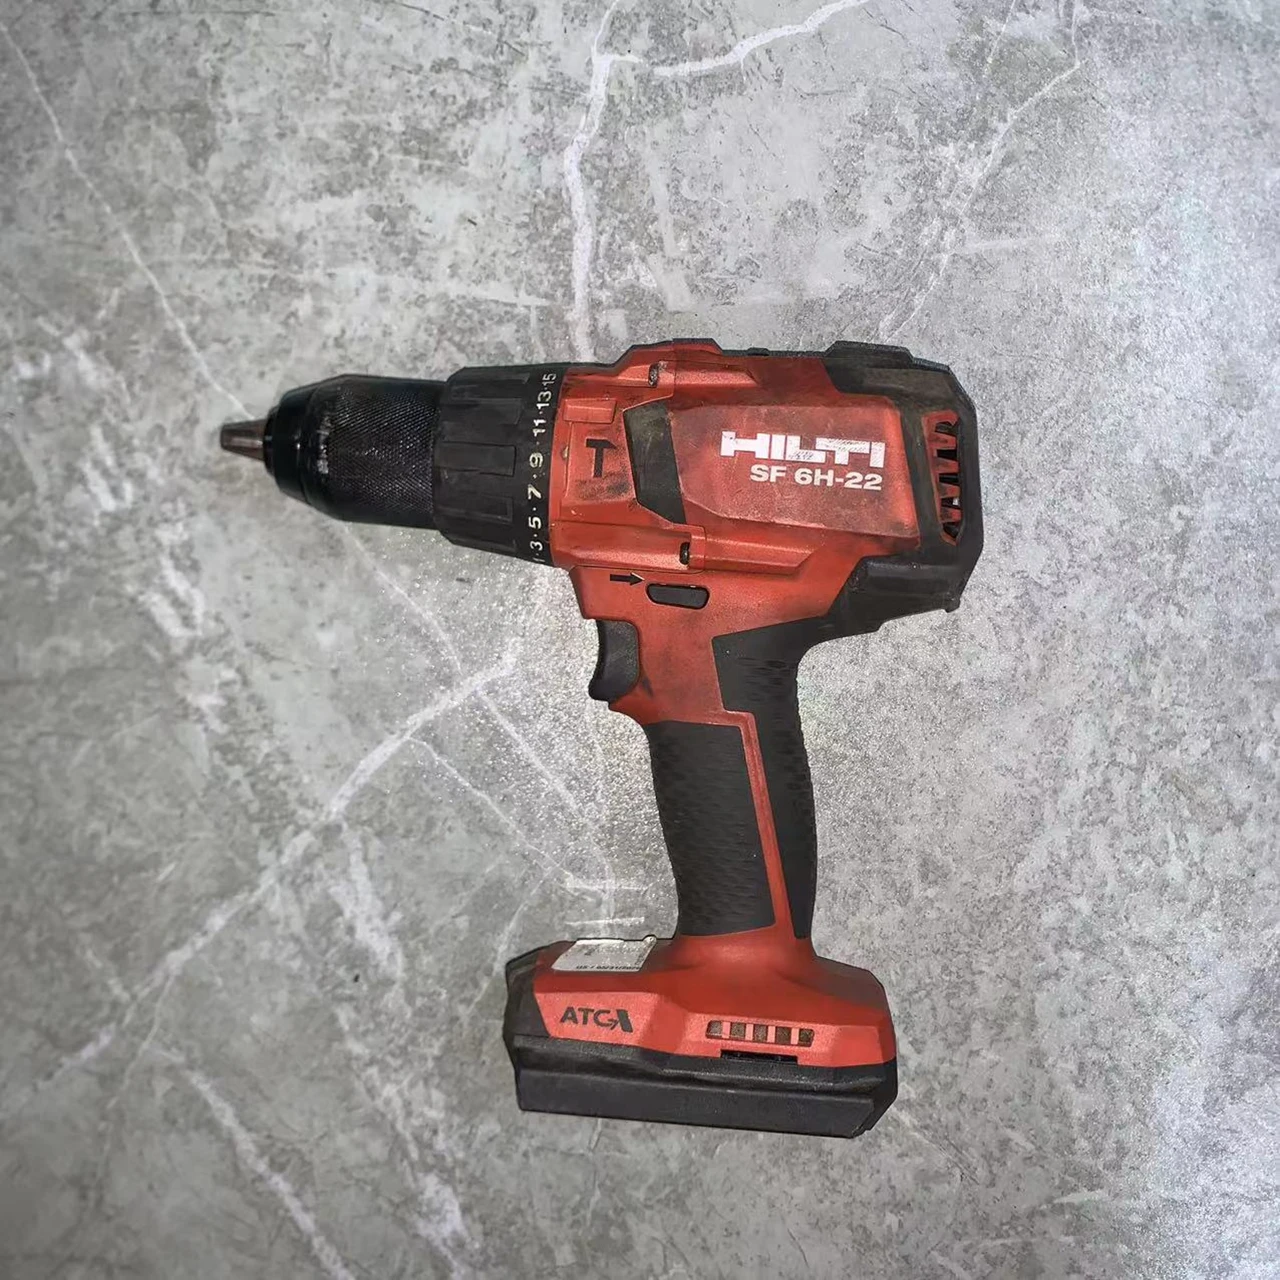 

NURON System HILTI SF 6H-22 Hammer Drill Driver Compact (Tool Only) second-hand